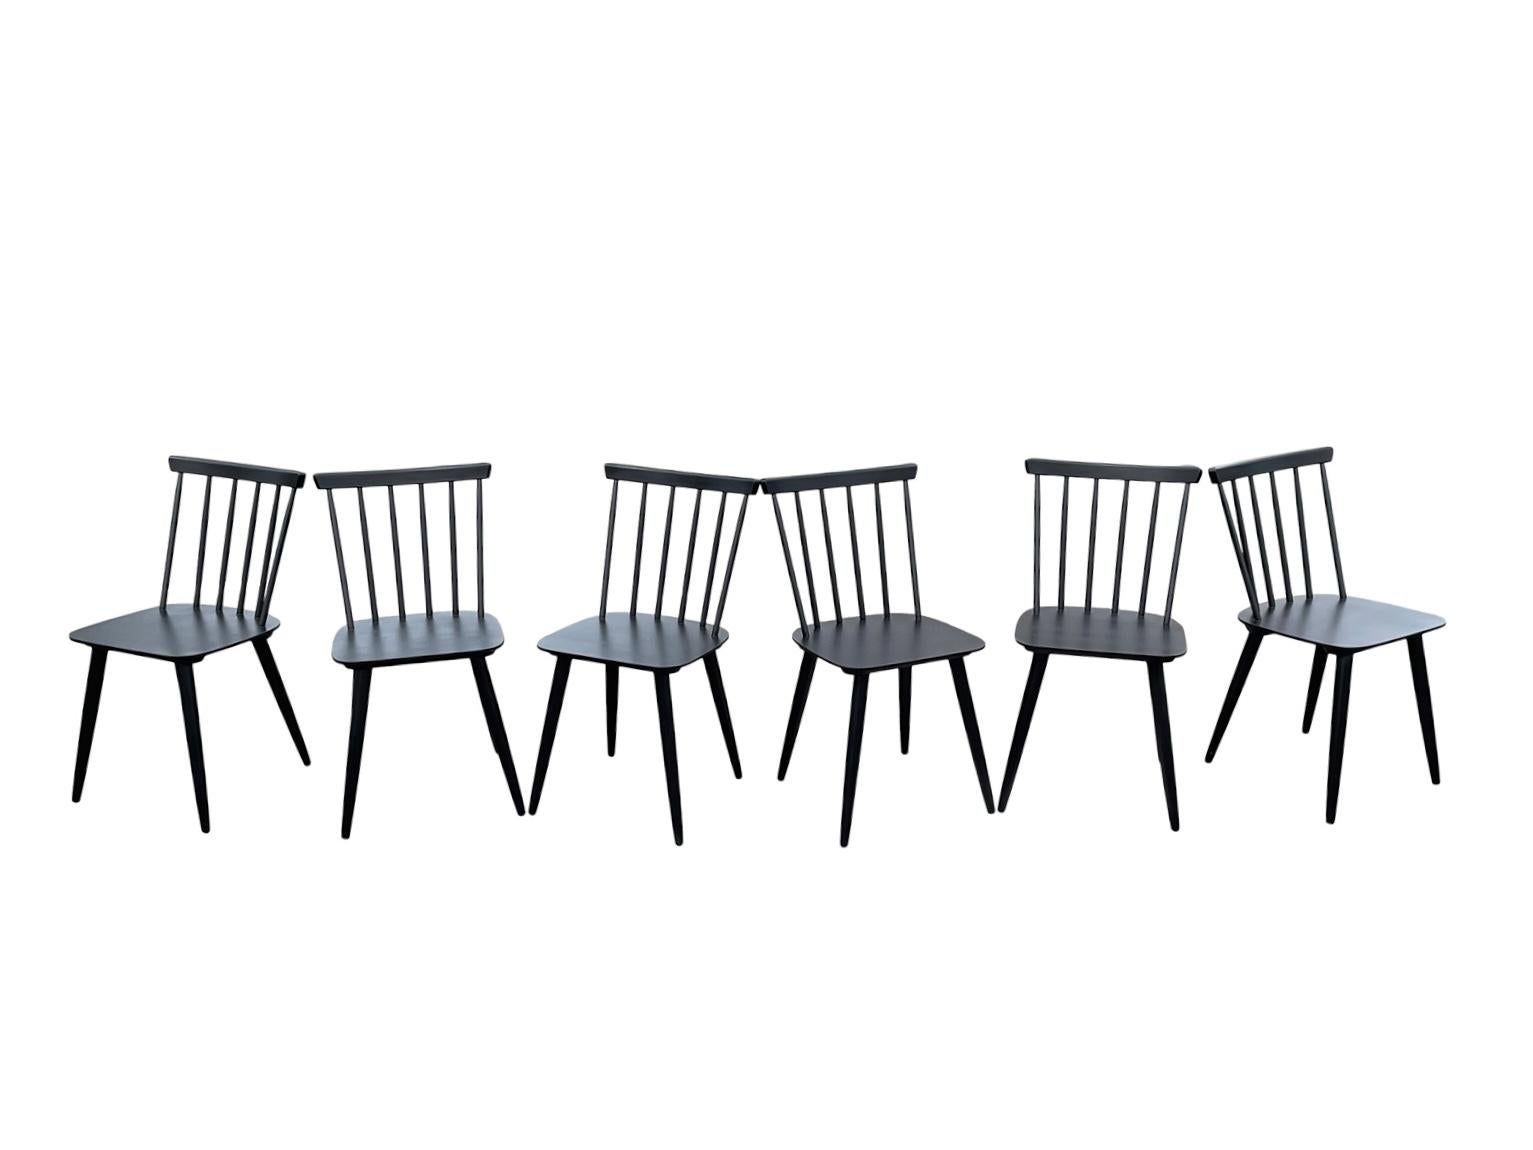 Mid-Century Modern 1950s Black Lacquered Varjonen Spindle Back Dining Chair Finland -Set of 6 